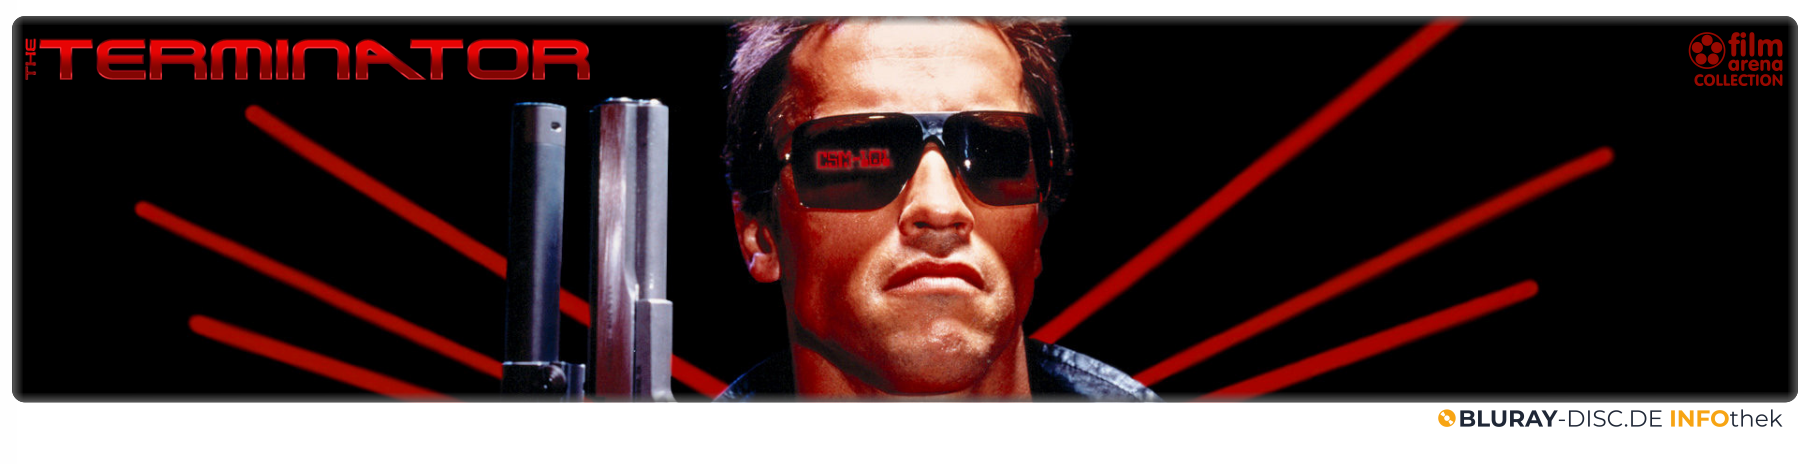 The_Terminator.png